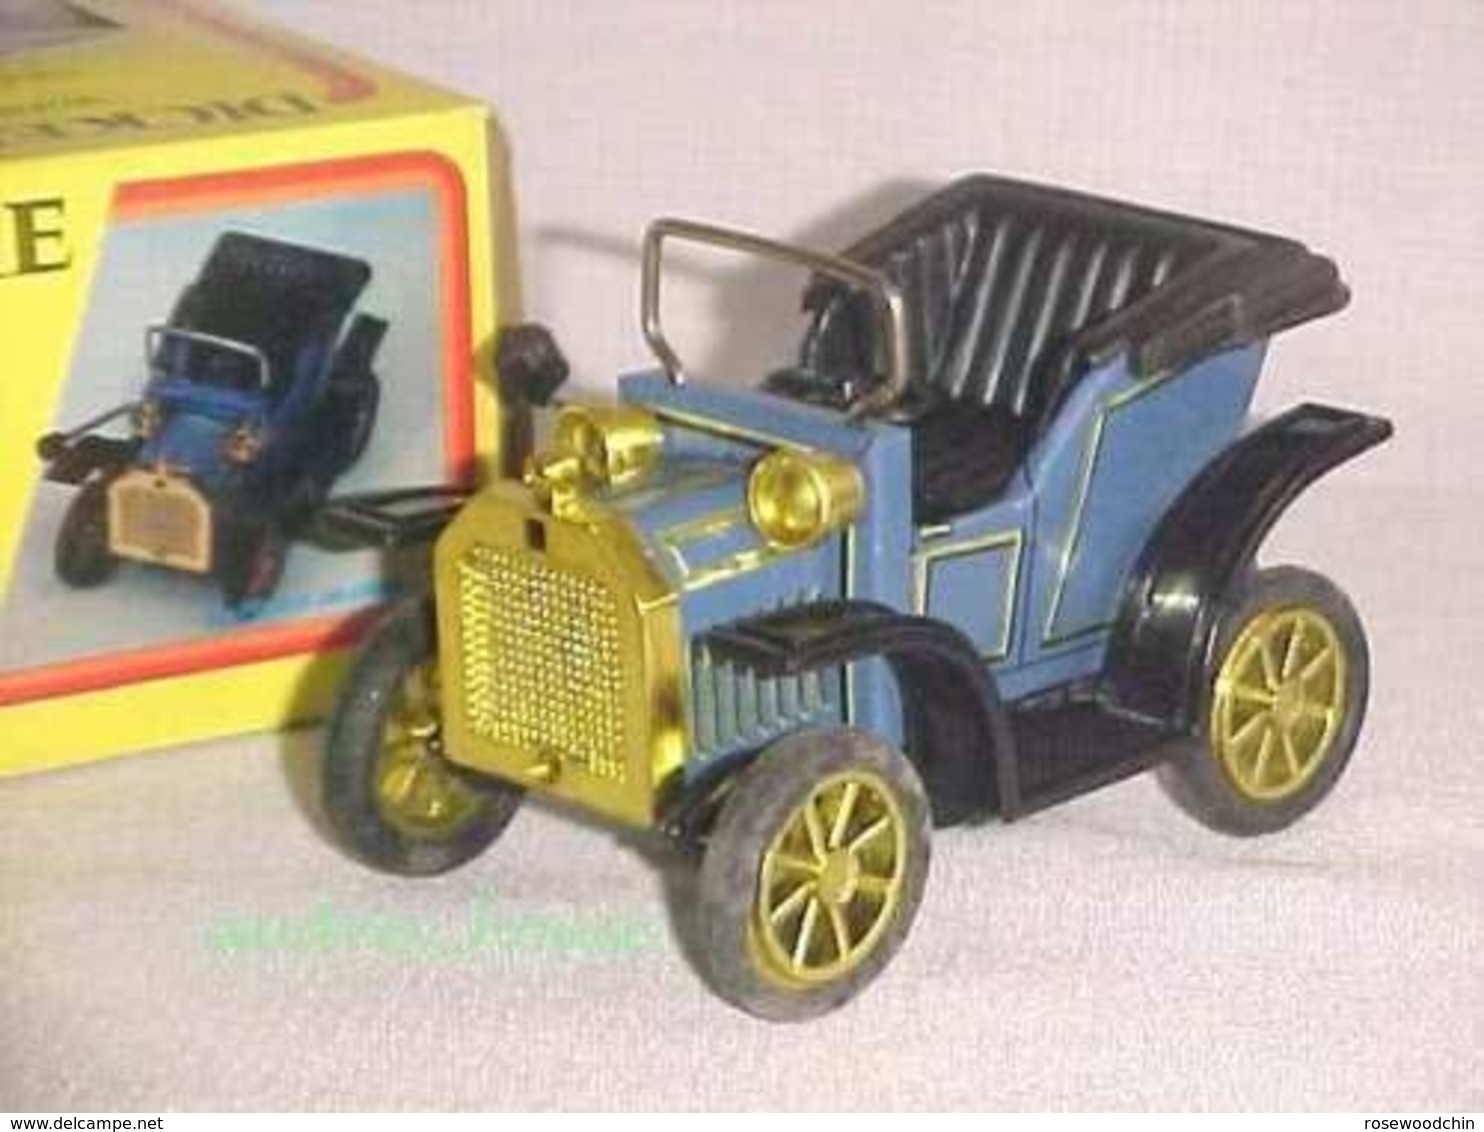 VINTAGE ! China 60s' Wind Up Tin Toy Dicken Car With Box (MS 058) - Toy Memorabilia